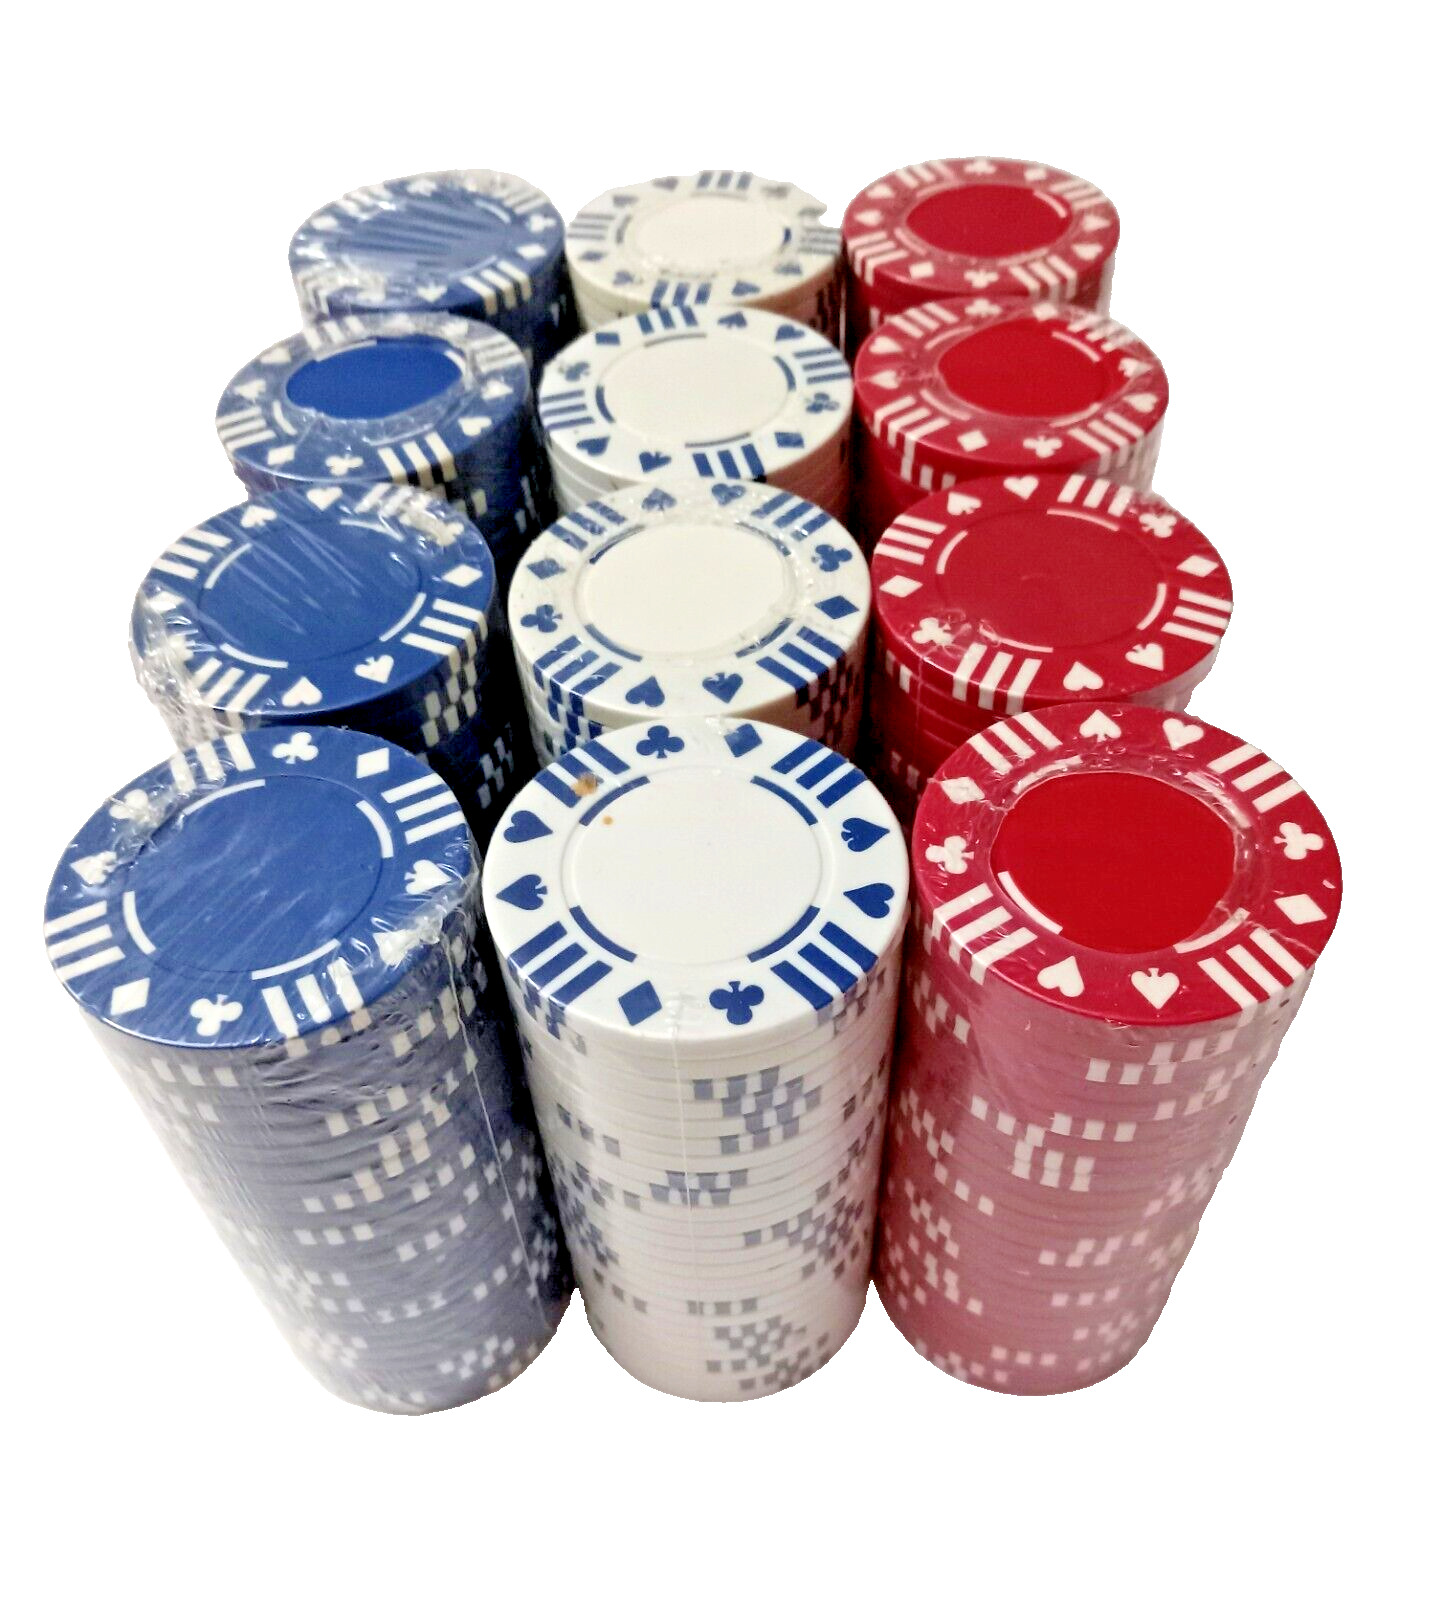 CASINO POKER CHIPS -  300 Pieces Suited Design - 3 Colors - Brand New 